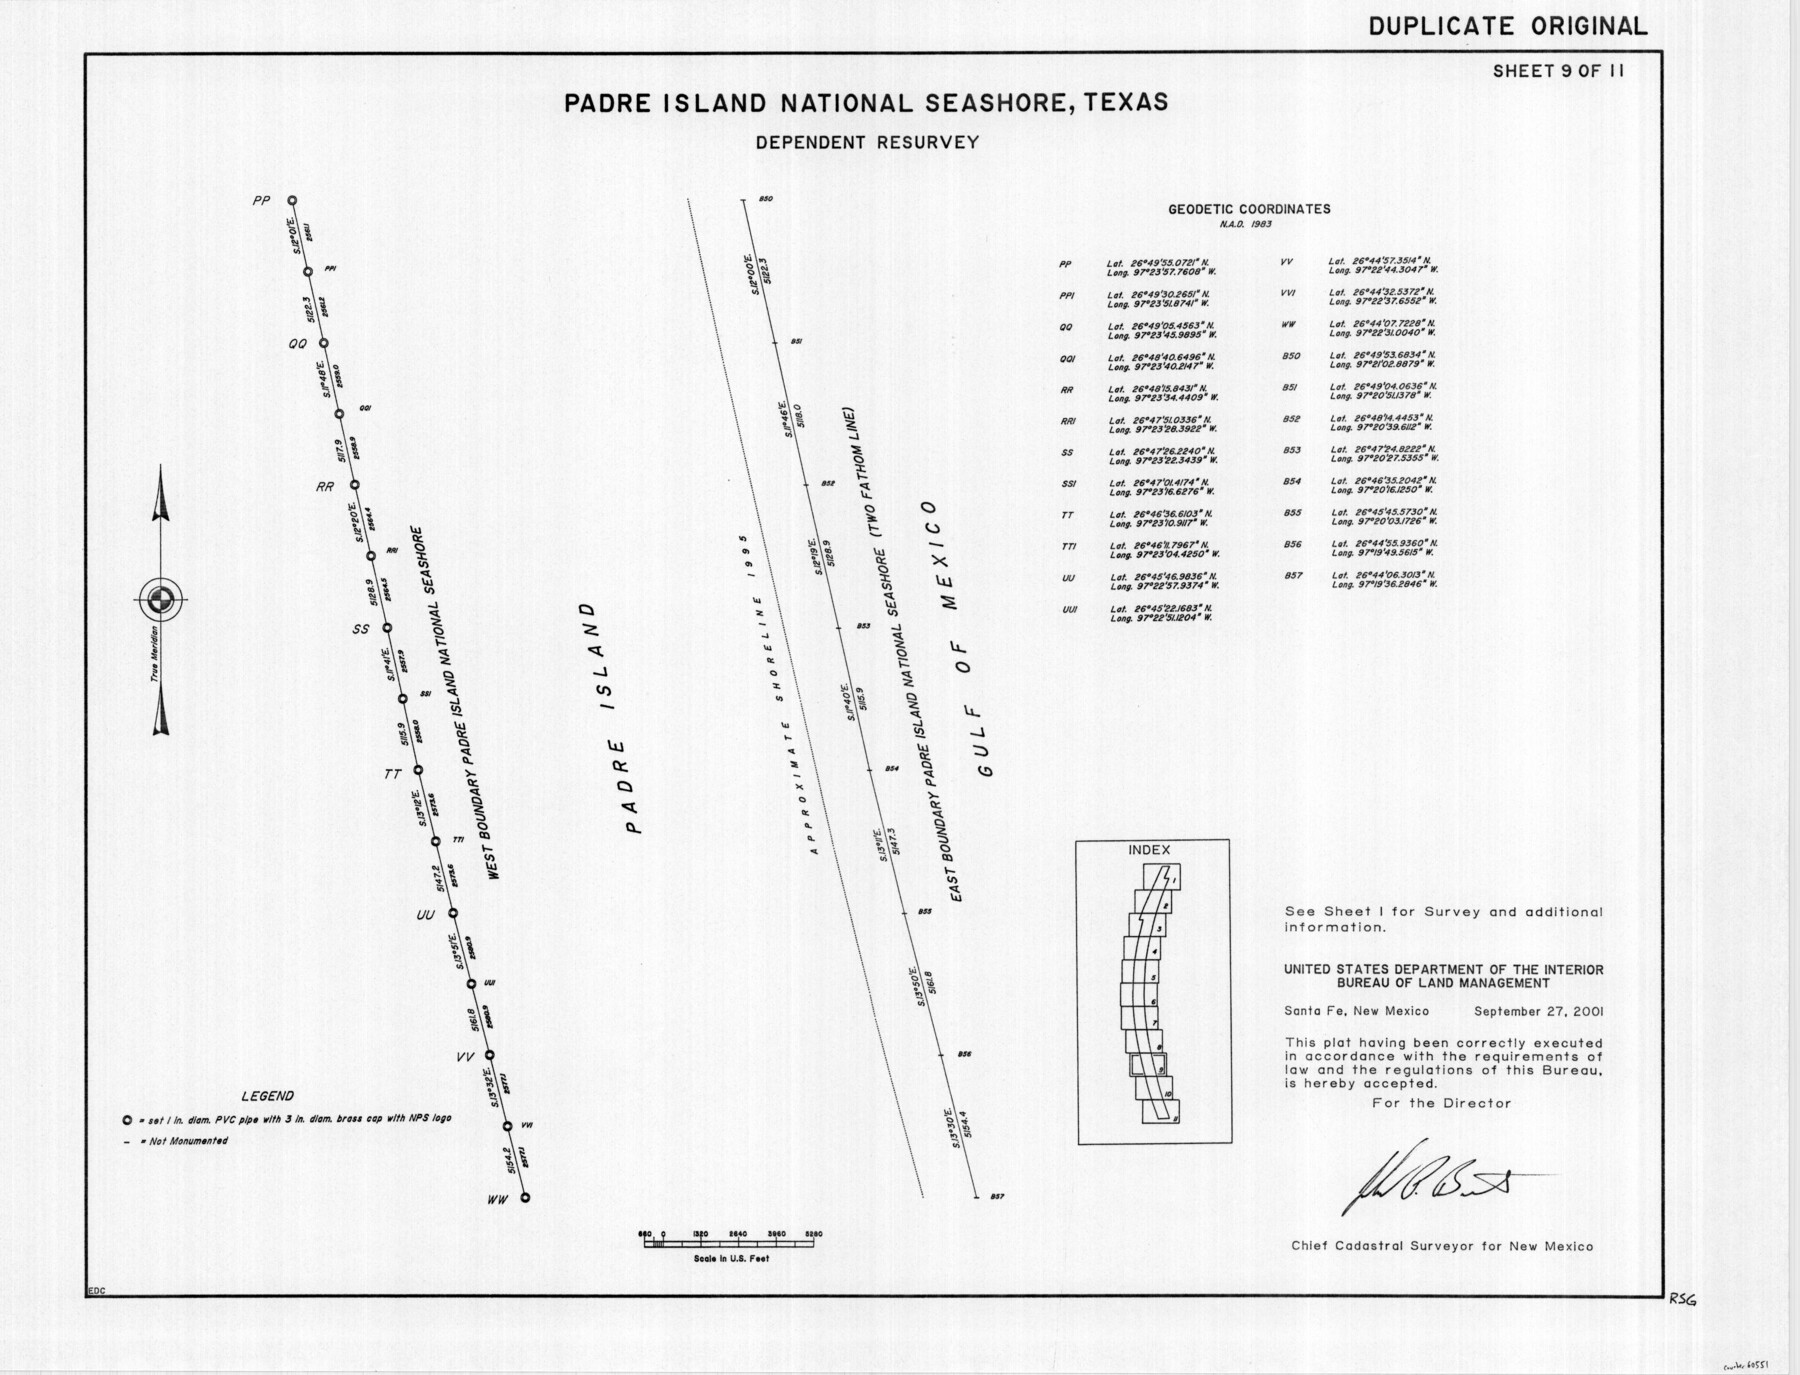 60551, Padre Island National Seashore, Texas - Dependent Resurvey, General Map Collection